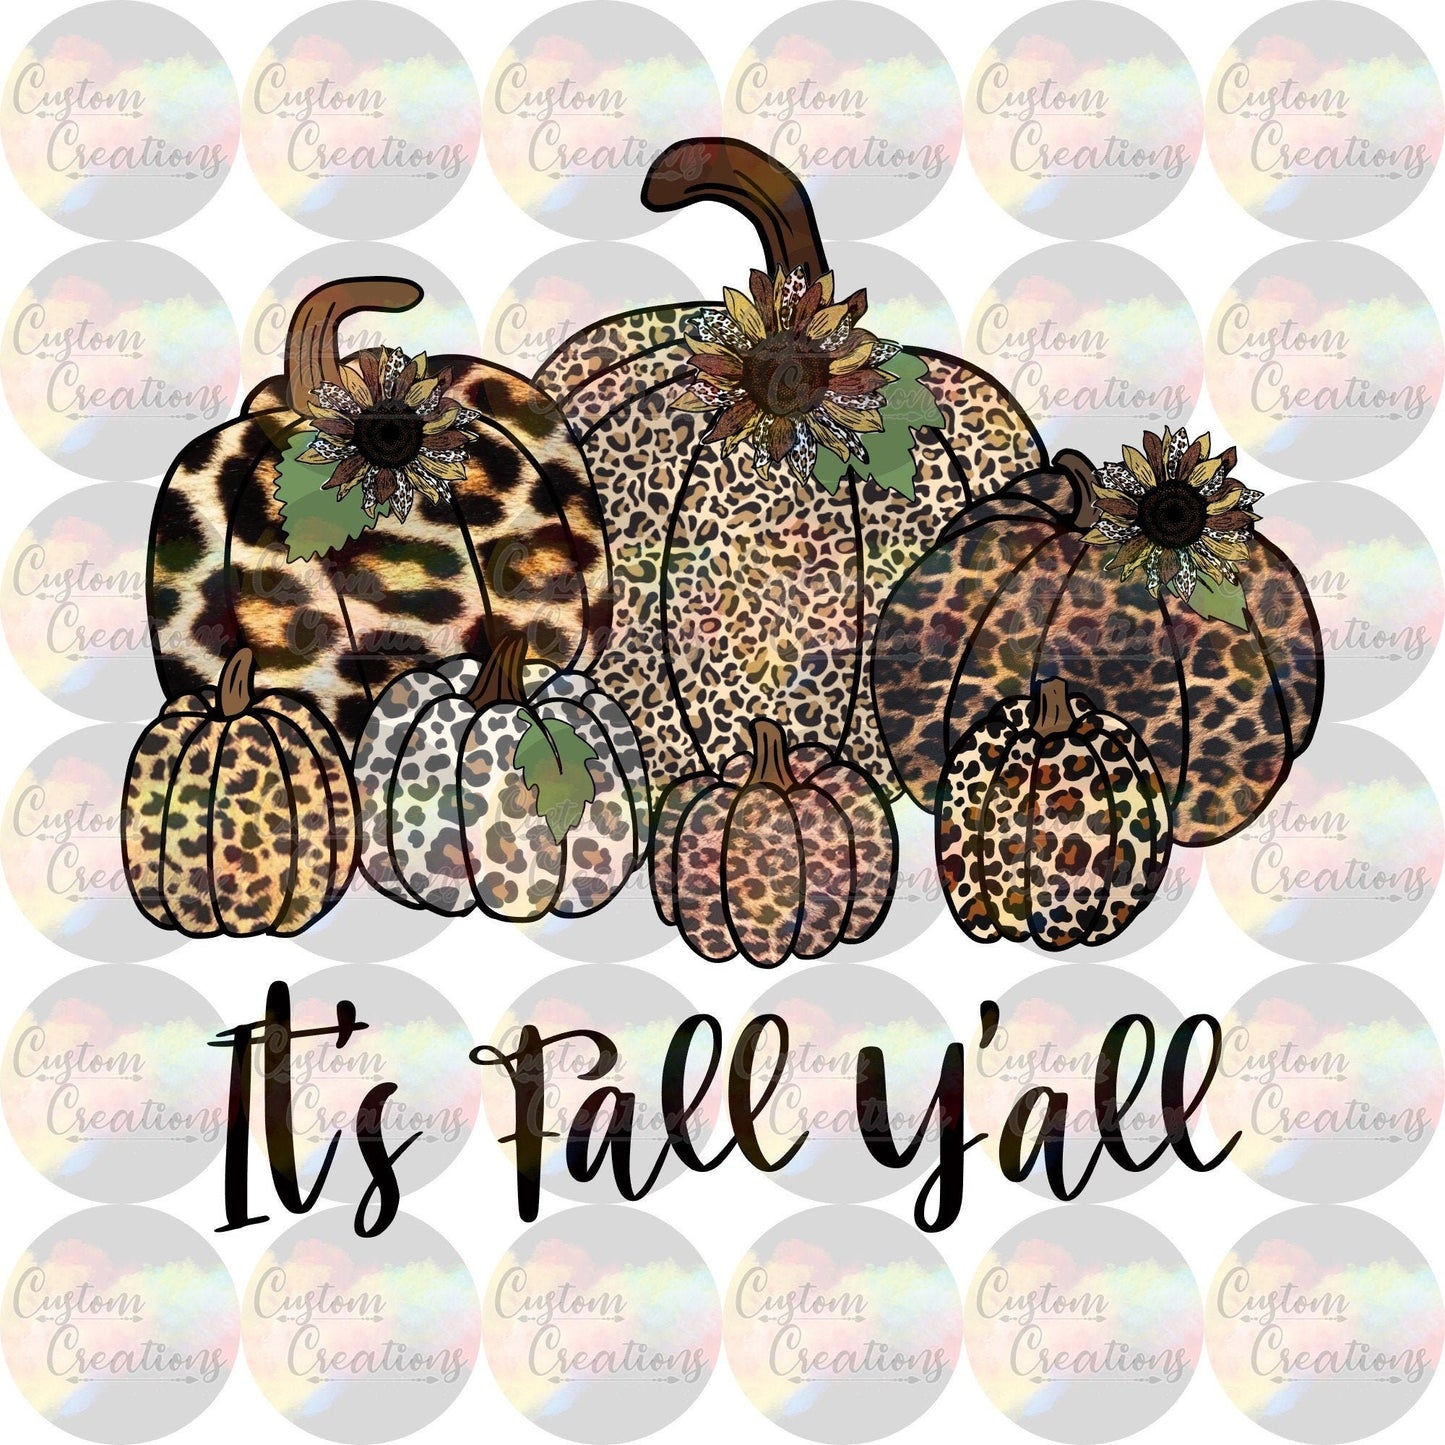 It's Fall Y'all Pumpkins with Cheetah Print and Leopard Print 3.5" Clear Laser Printed Waterslide